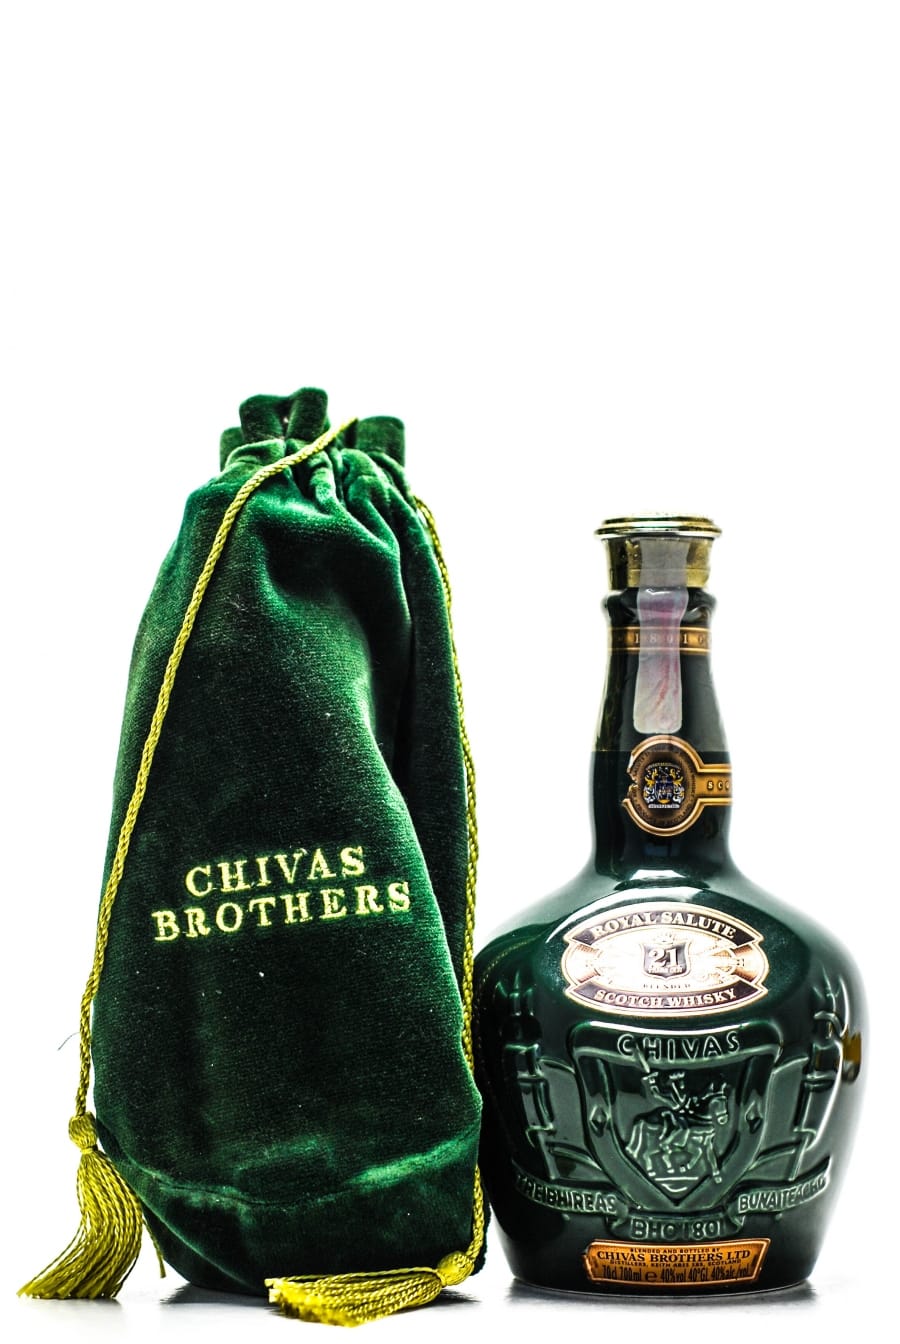 Royal Salute - 21 Yeas Old Emerald Flagon (90's edition) 46% NAS Perfect